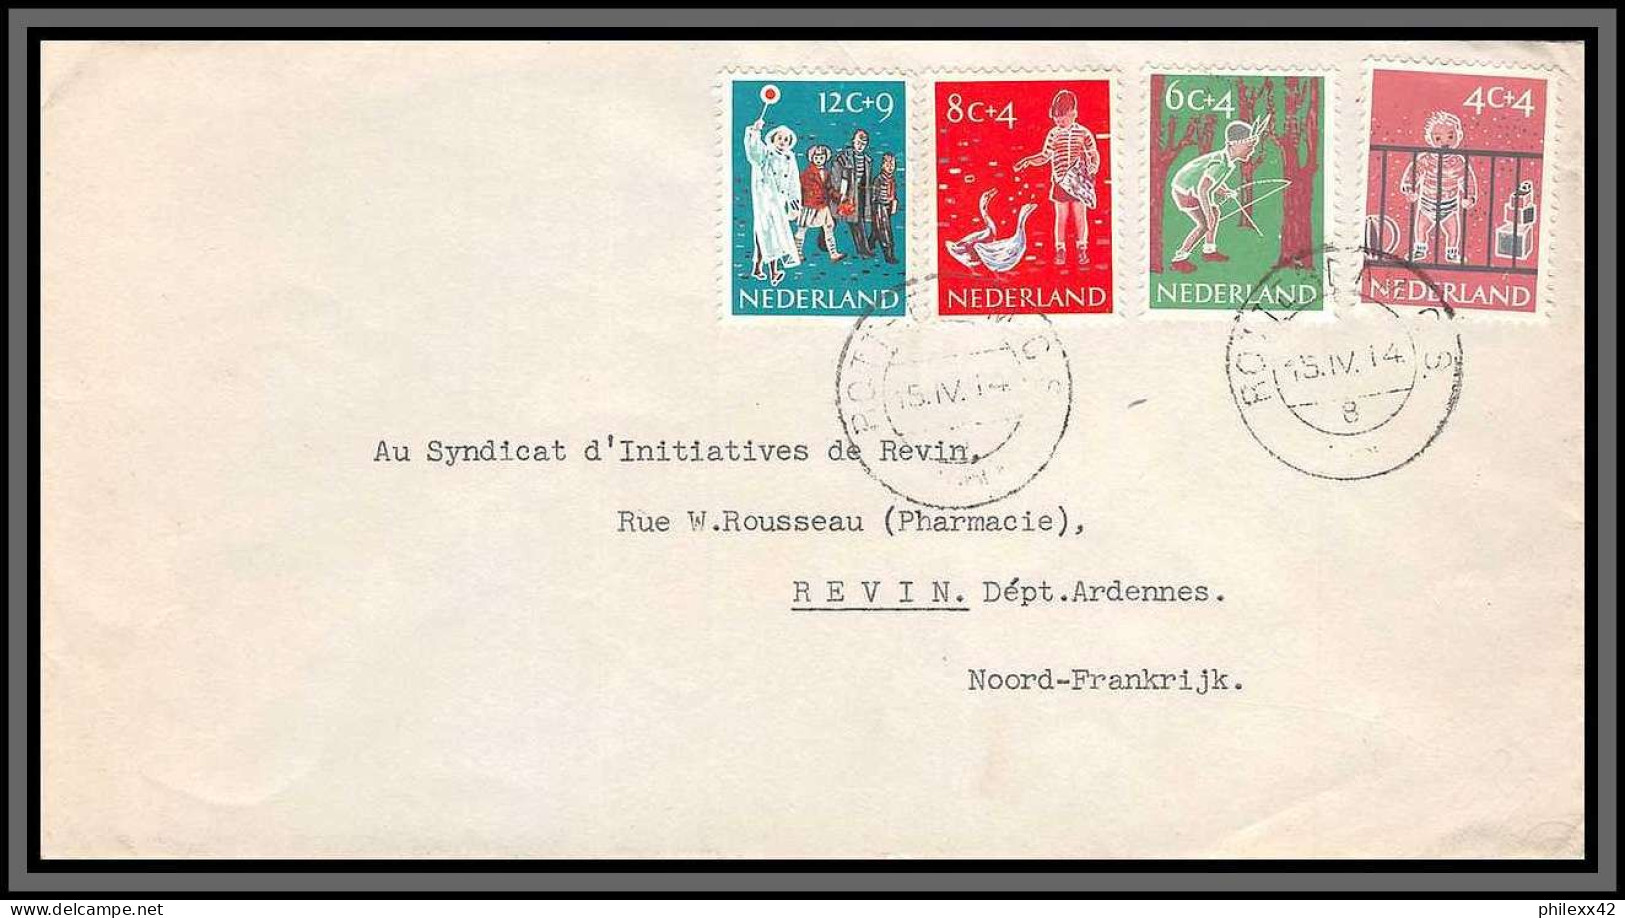 11355 1959 Kind. Keurig Getypt Adres Rotterdam Pour Revin Ardennes Lettre Cover Pays Bas Nederland  - Marcofilia